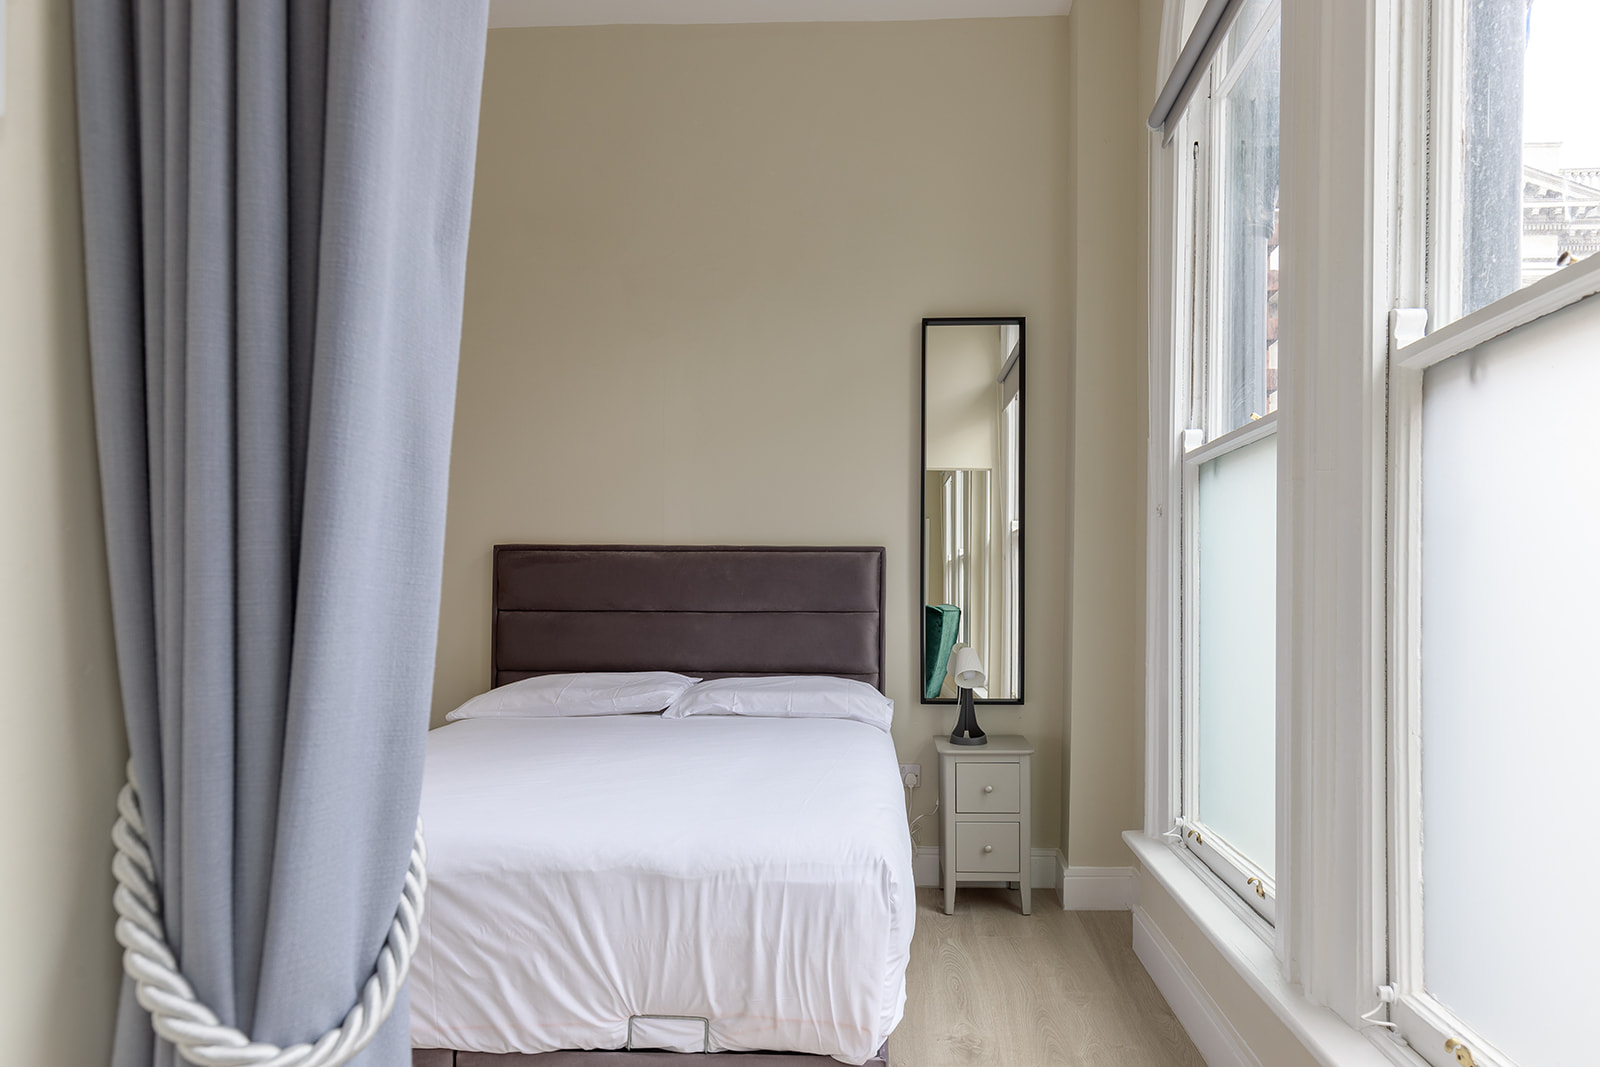 Boutique Apartments with Modern Amenities — Our boutique apartments are tailored to meet the needs of modern travelers. Whether you're staying for a few days or extending your visit, each suite is equipped with everything you need for a comfortable stay - from high-speed Wi-Fi and TVs to fully-equipped kitchens. The stylish decor and spacious layouts make Dublin Castle Suites more than just a place to stay; they're a place to live and relax.